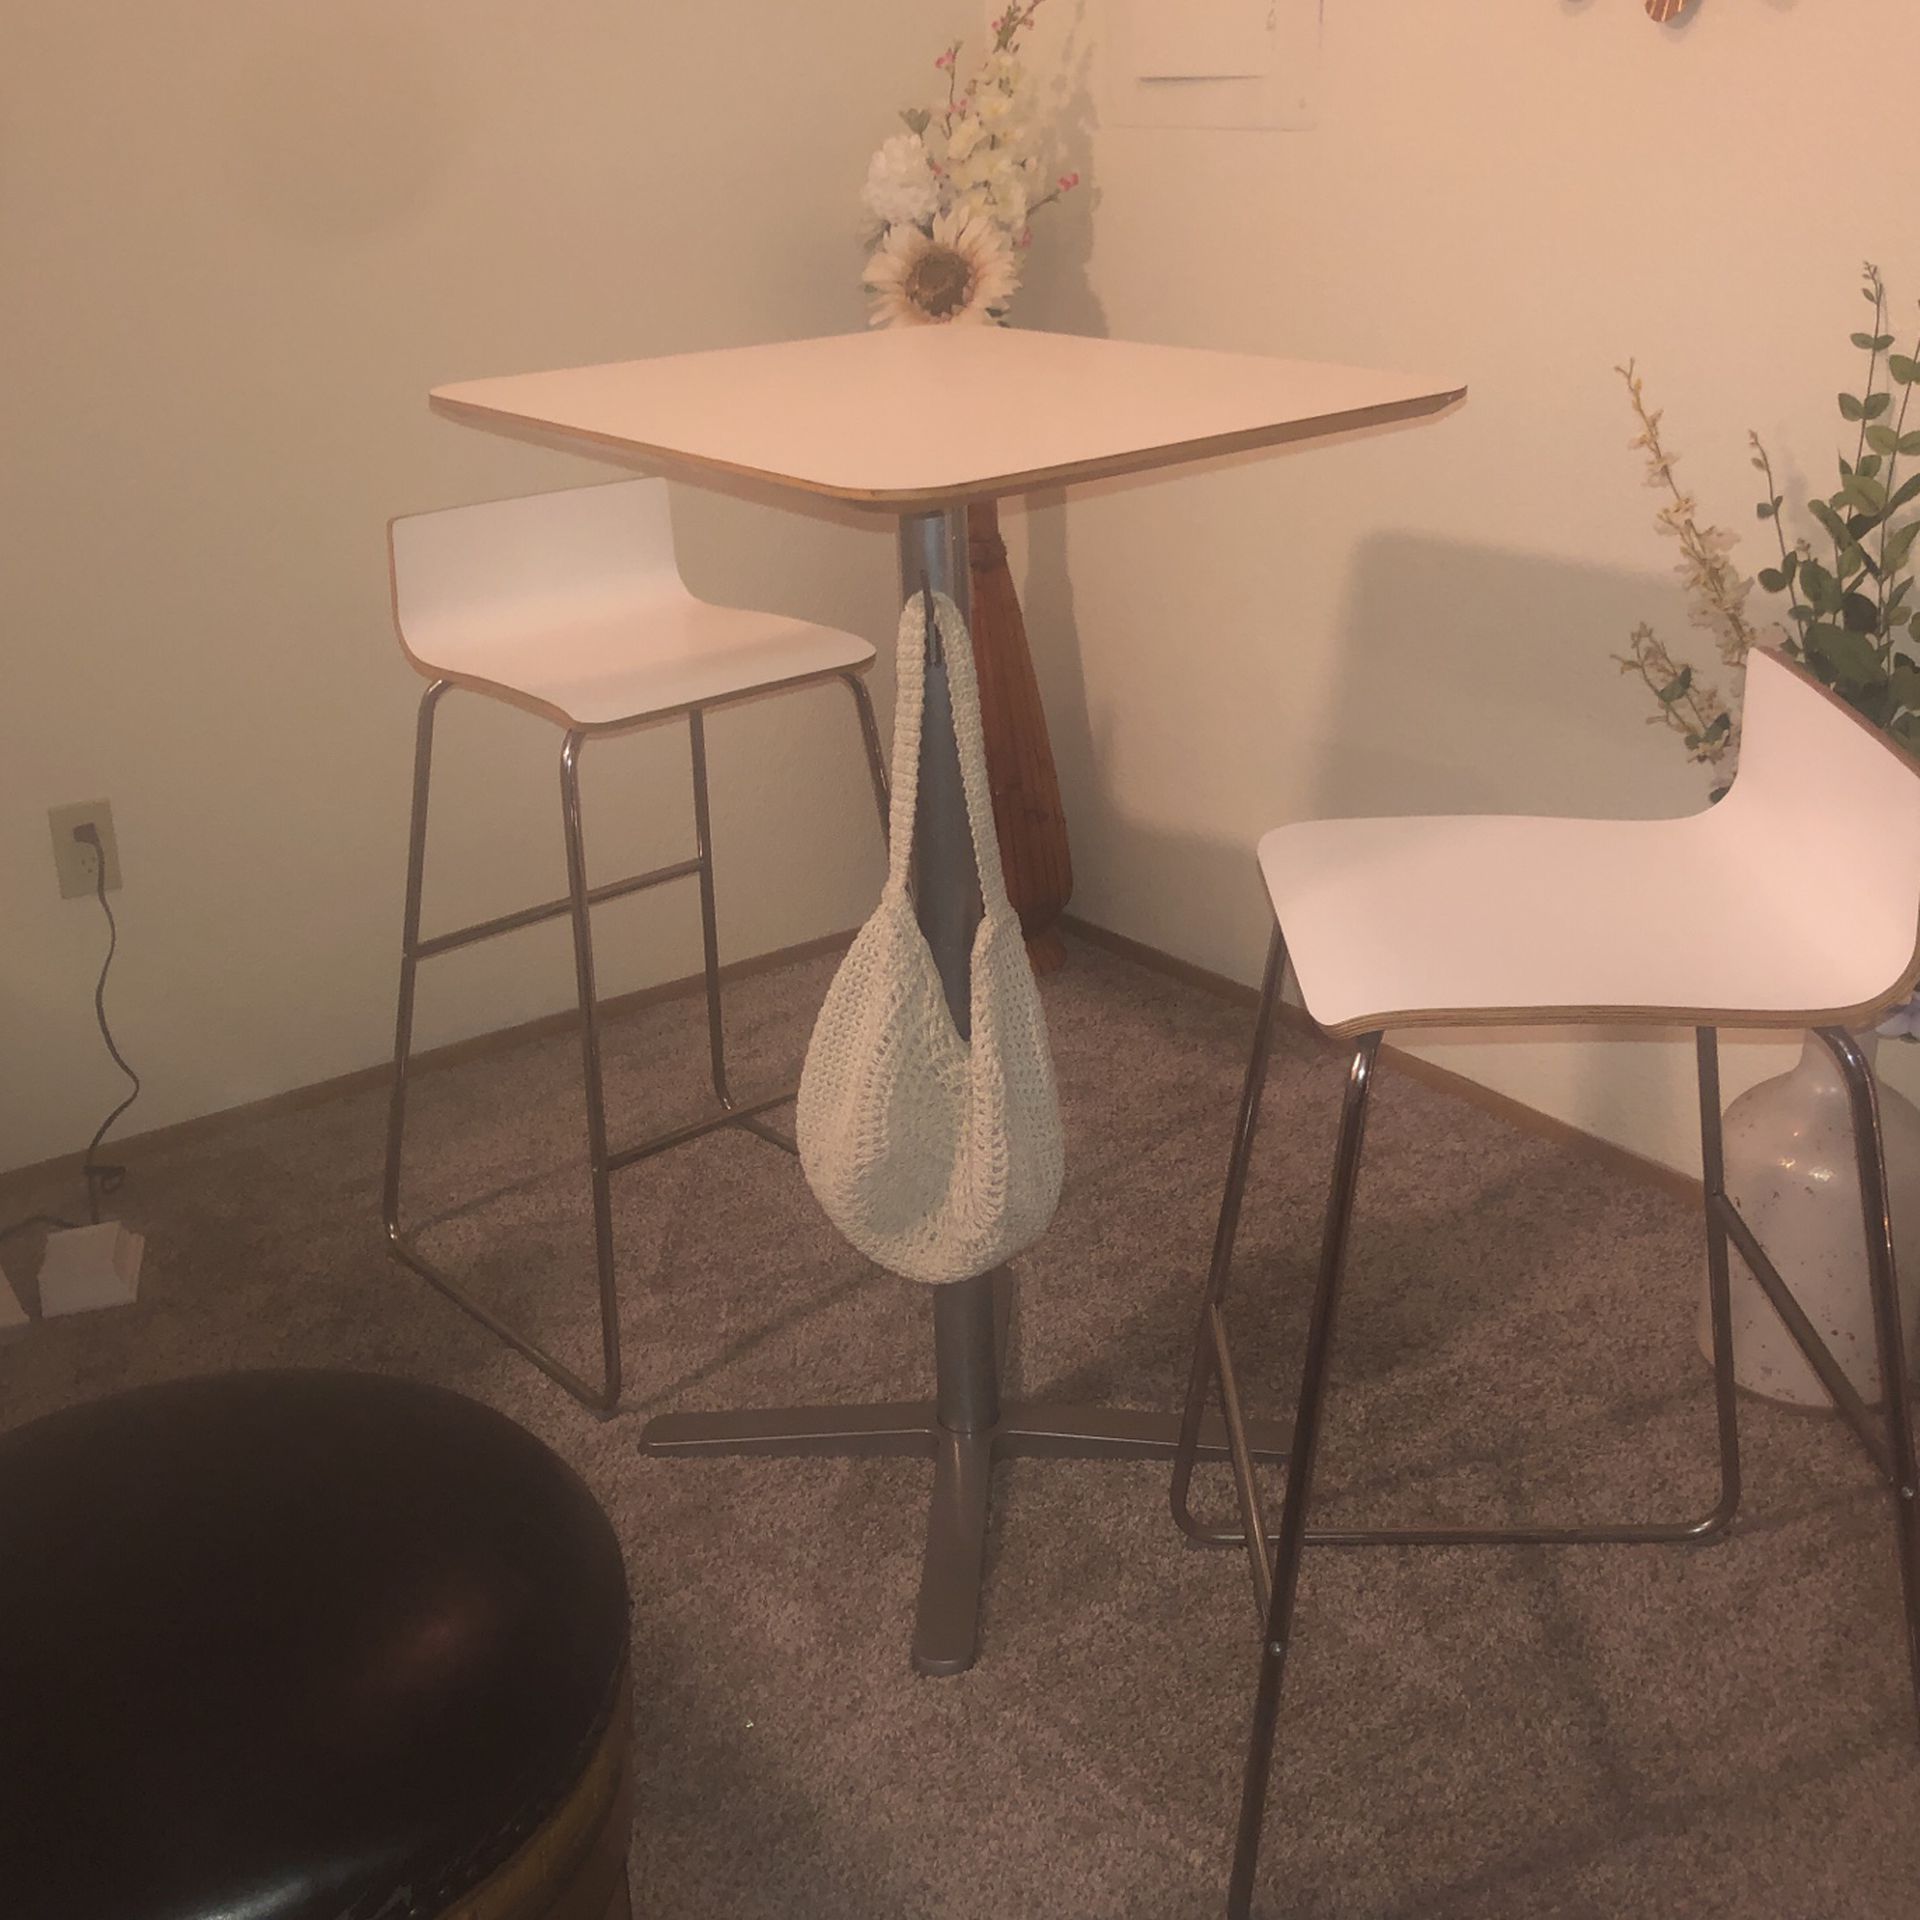 IKEA Small Table And Chairs